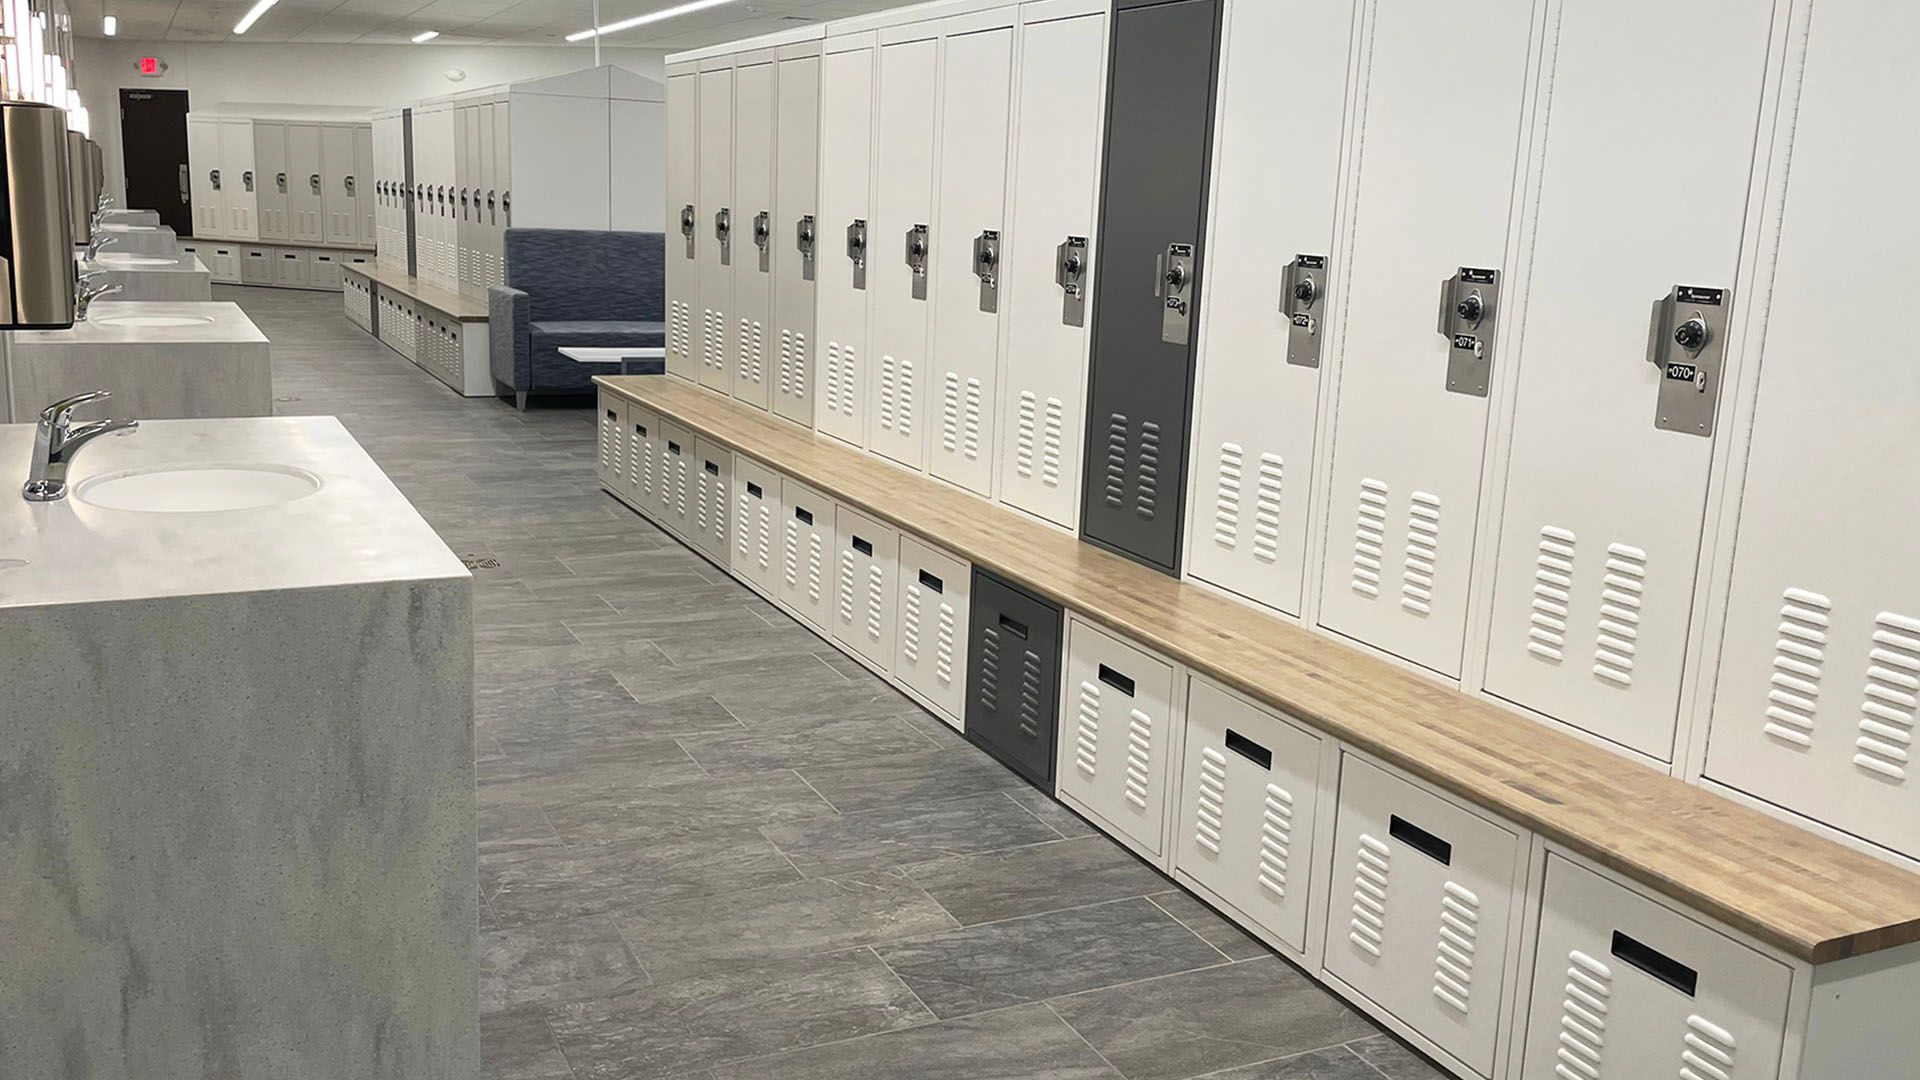 police locker room lockers and benches with multiple sinks across from them